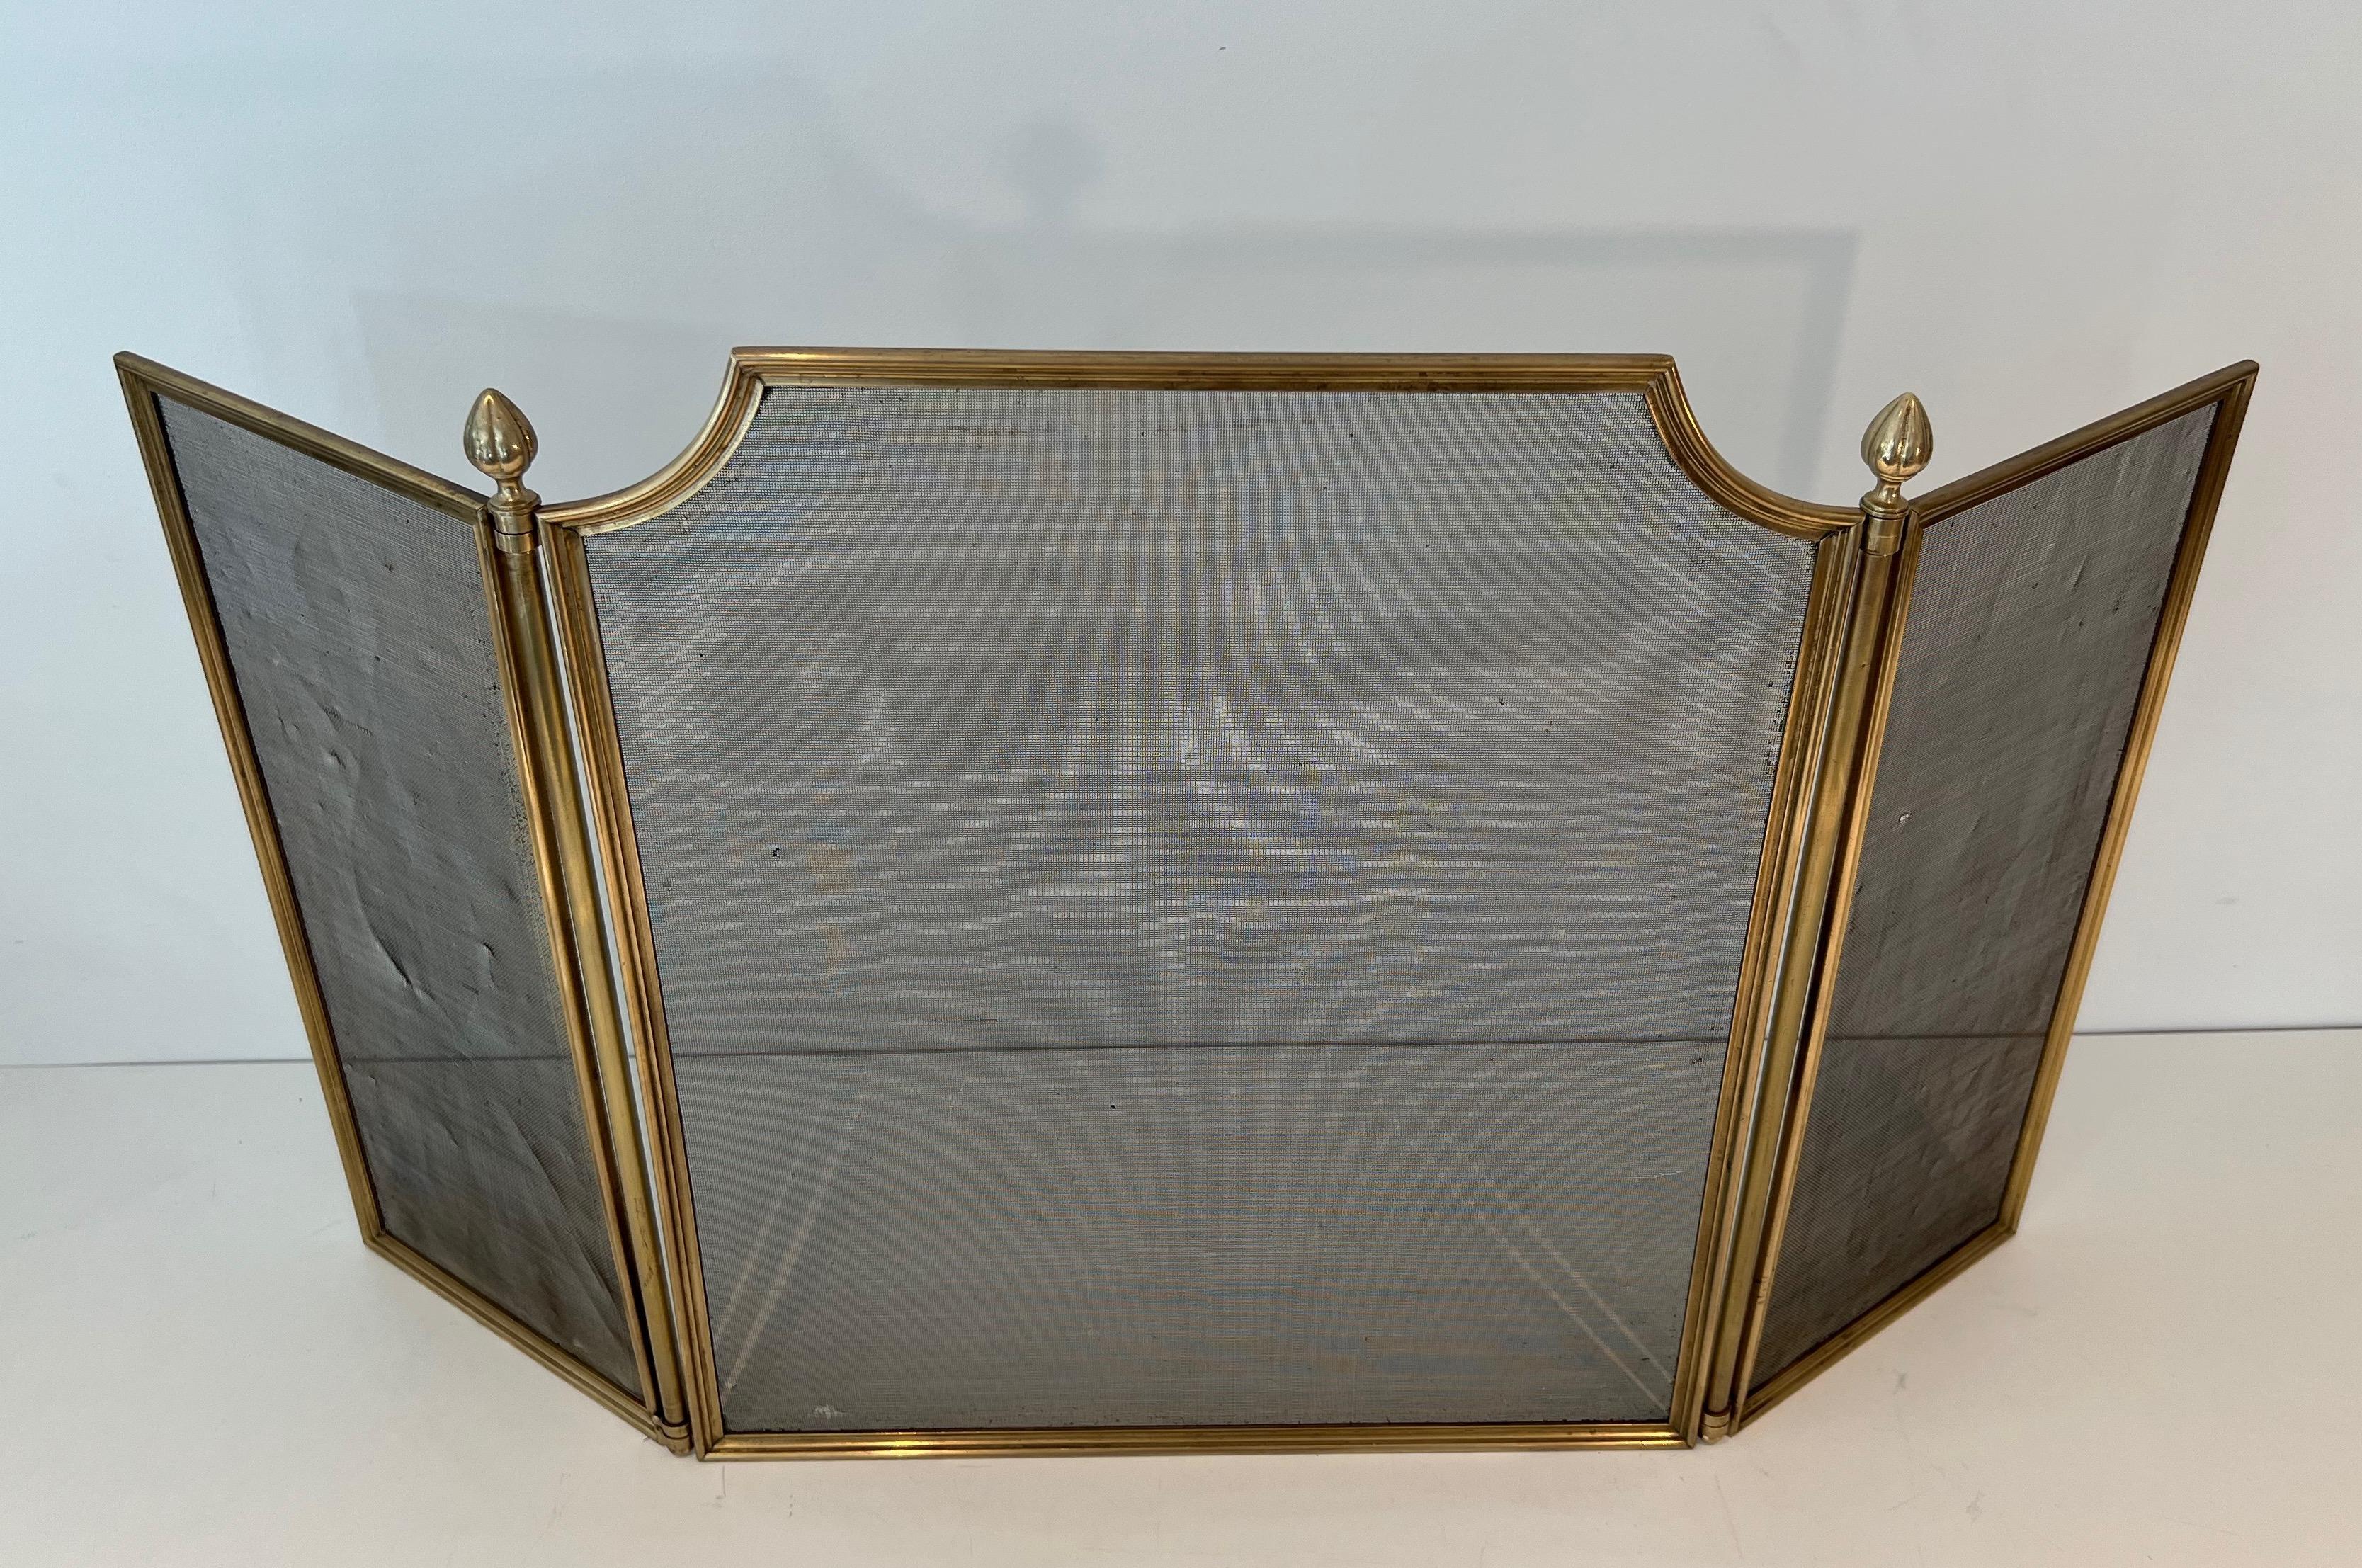 This neoclassical style 3 panels fireplace screen is made of brushed steel, brass and grilling. This is a French work in the style of Maison Jansen. Circa 1970